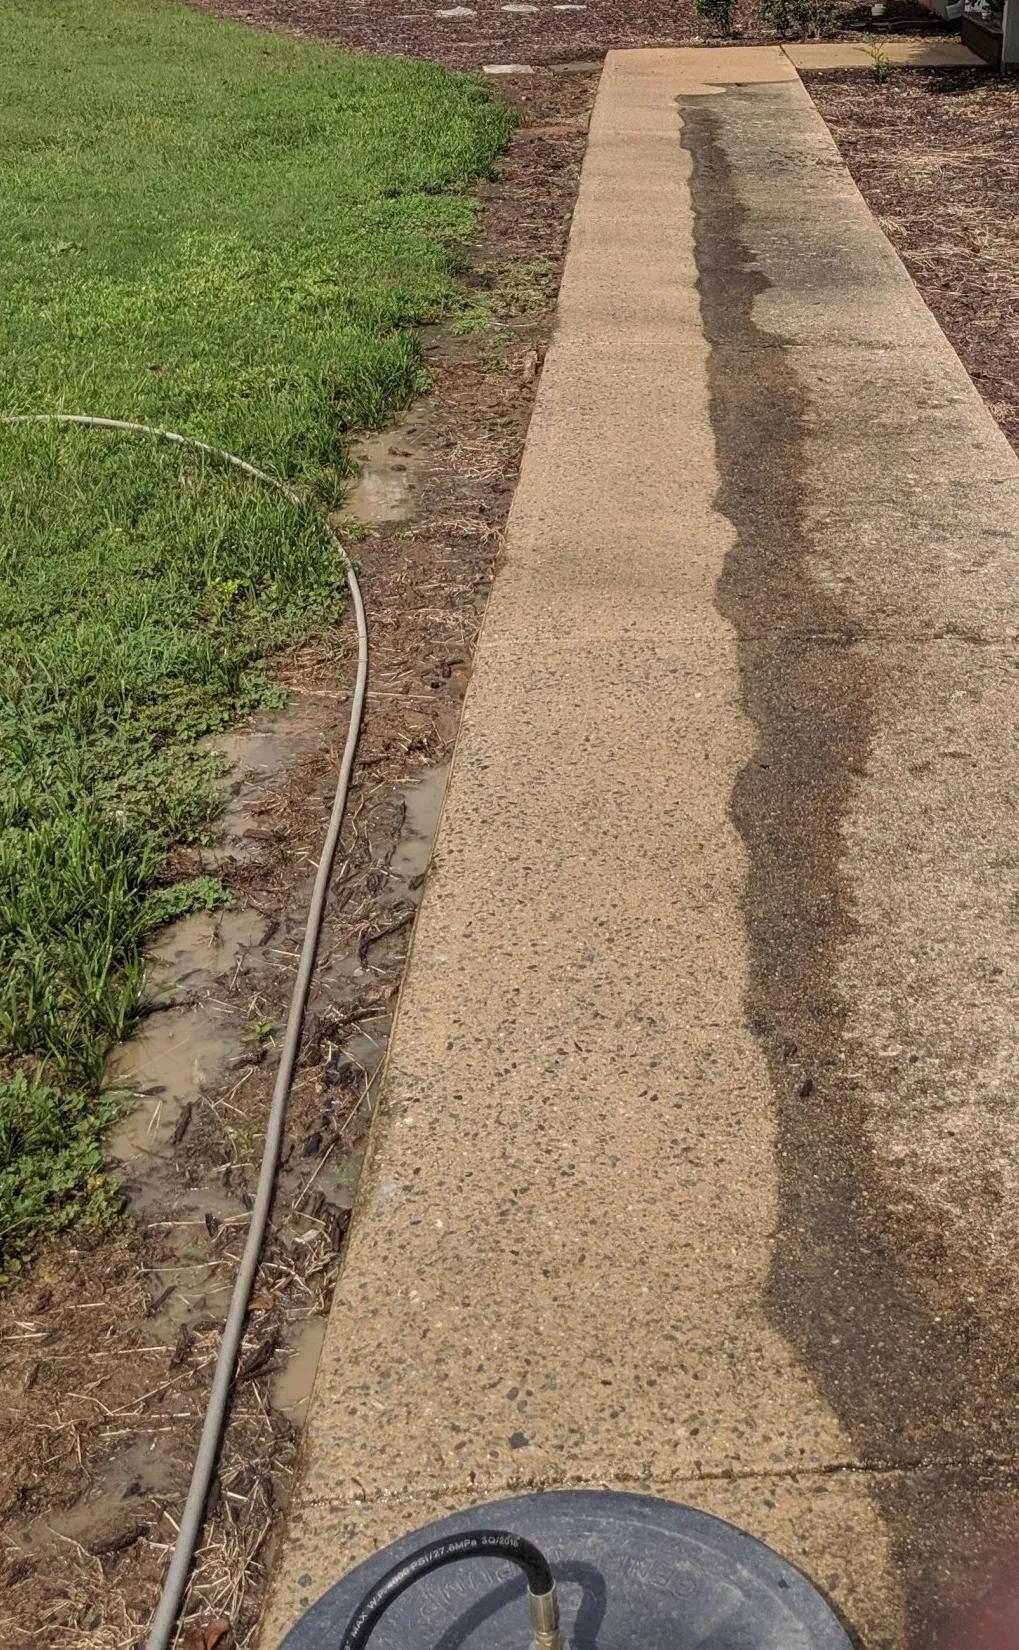 Why do I need to pressure wash my concrete?